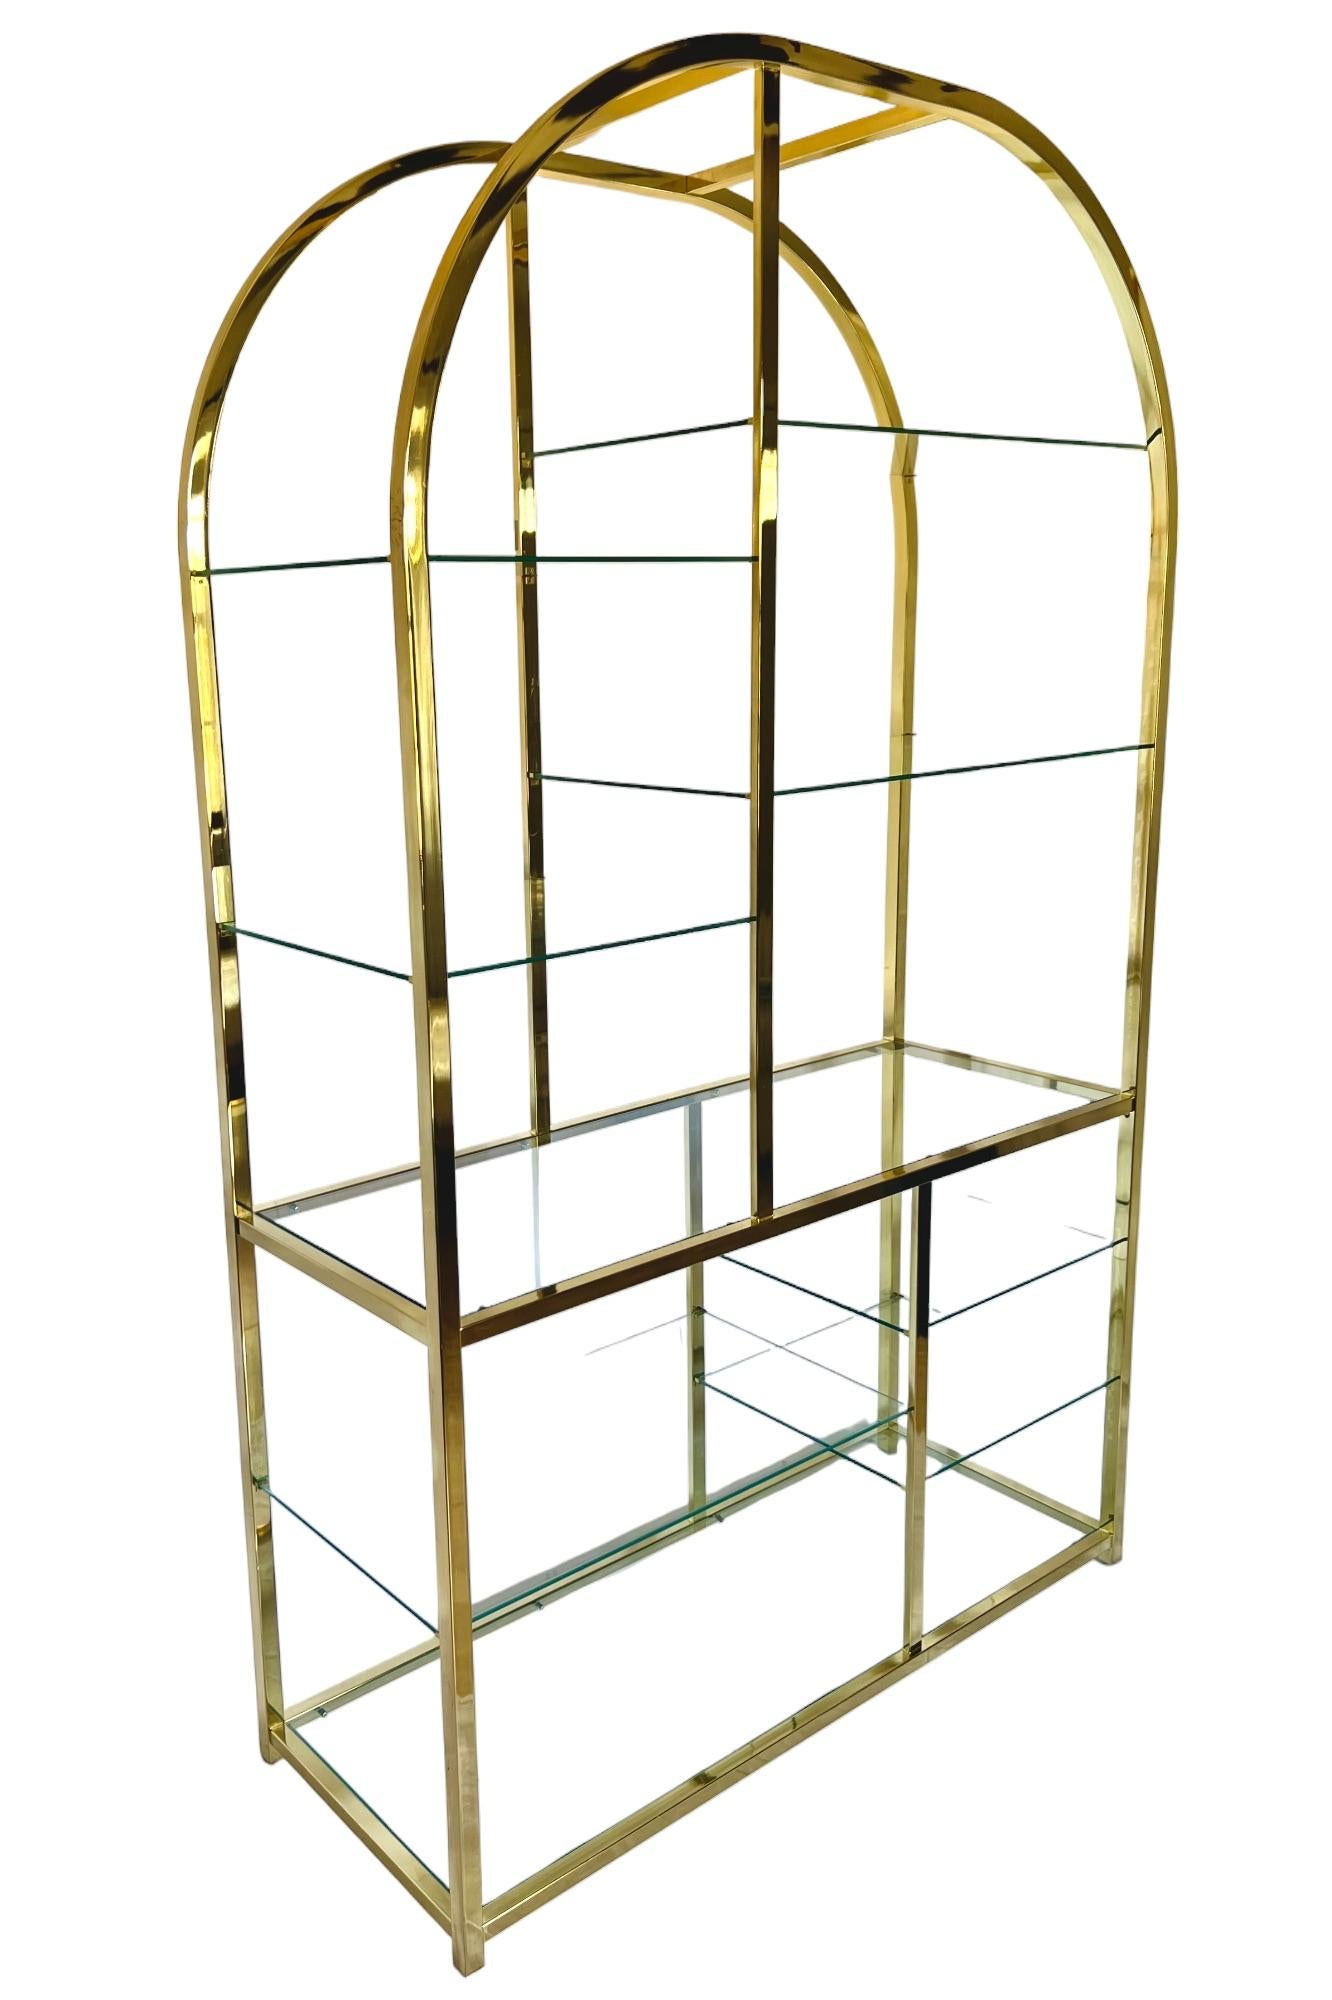 Late 20th Century Design Institute of America Gold Tiered Glass Arched Etagere, 1985